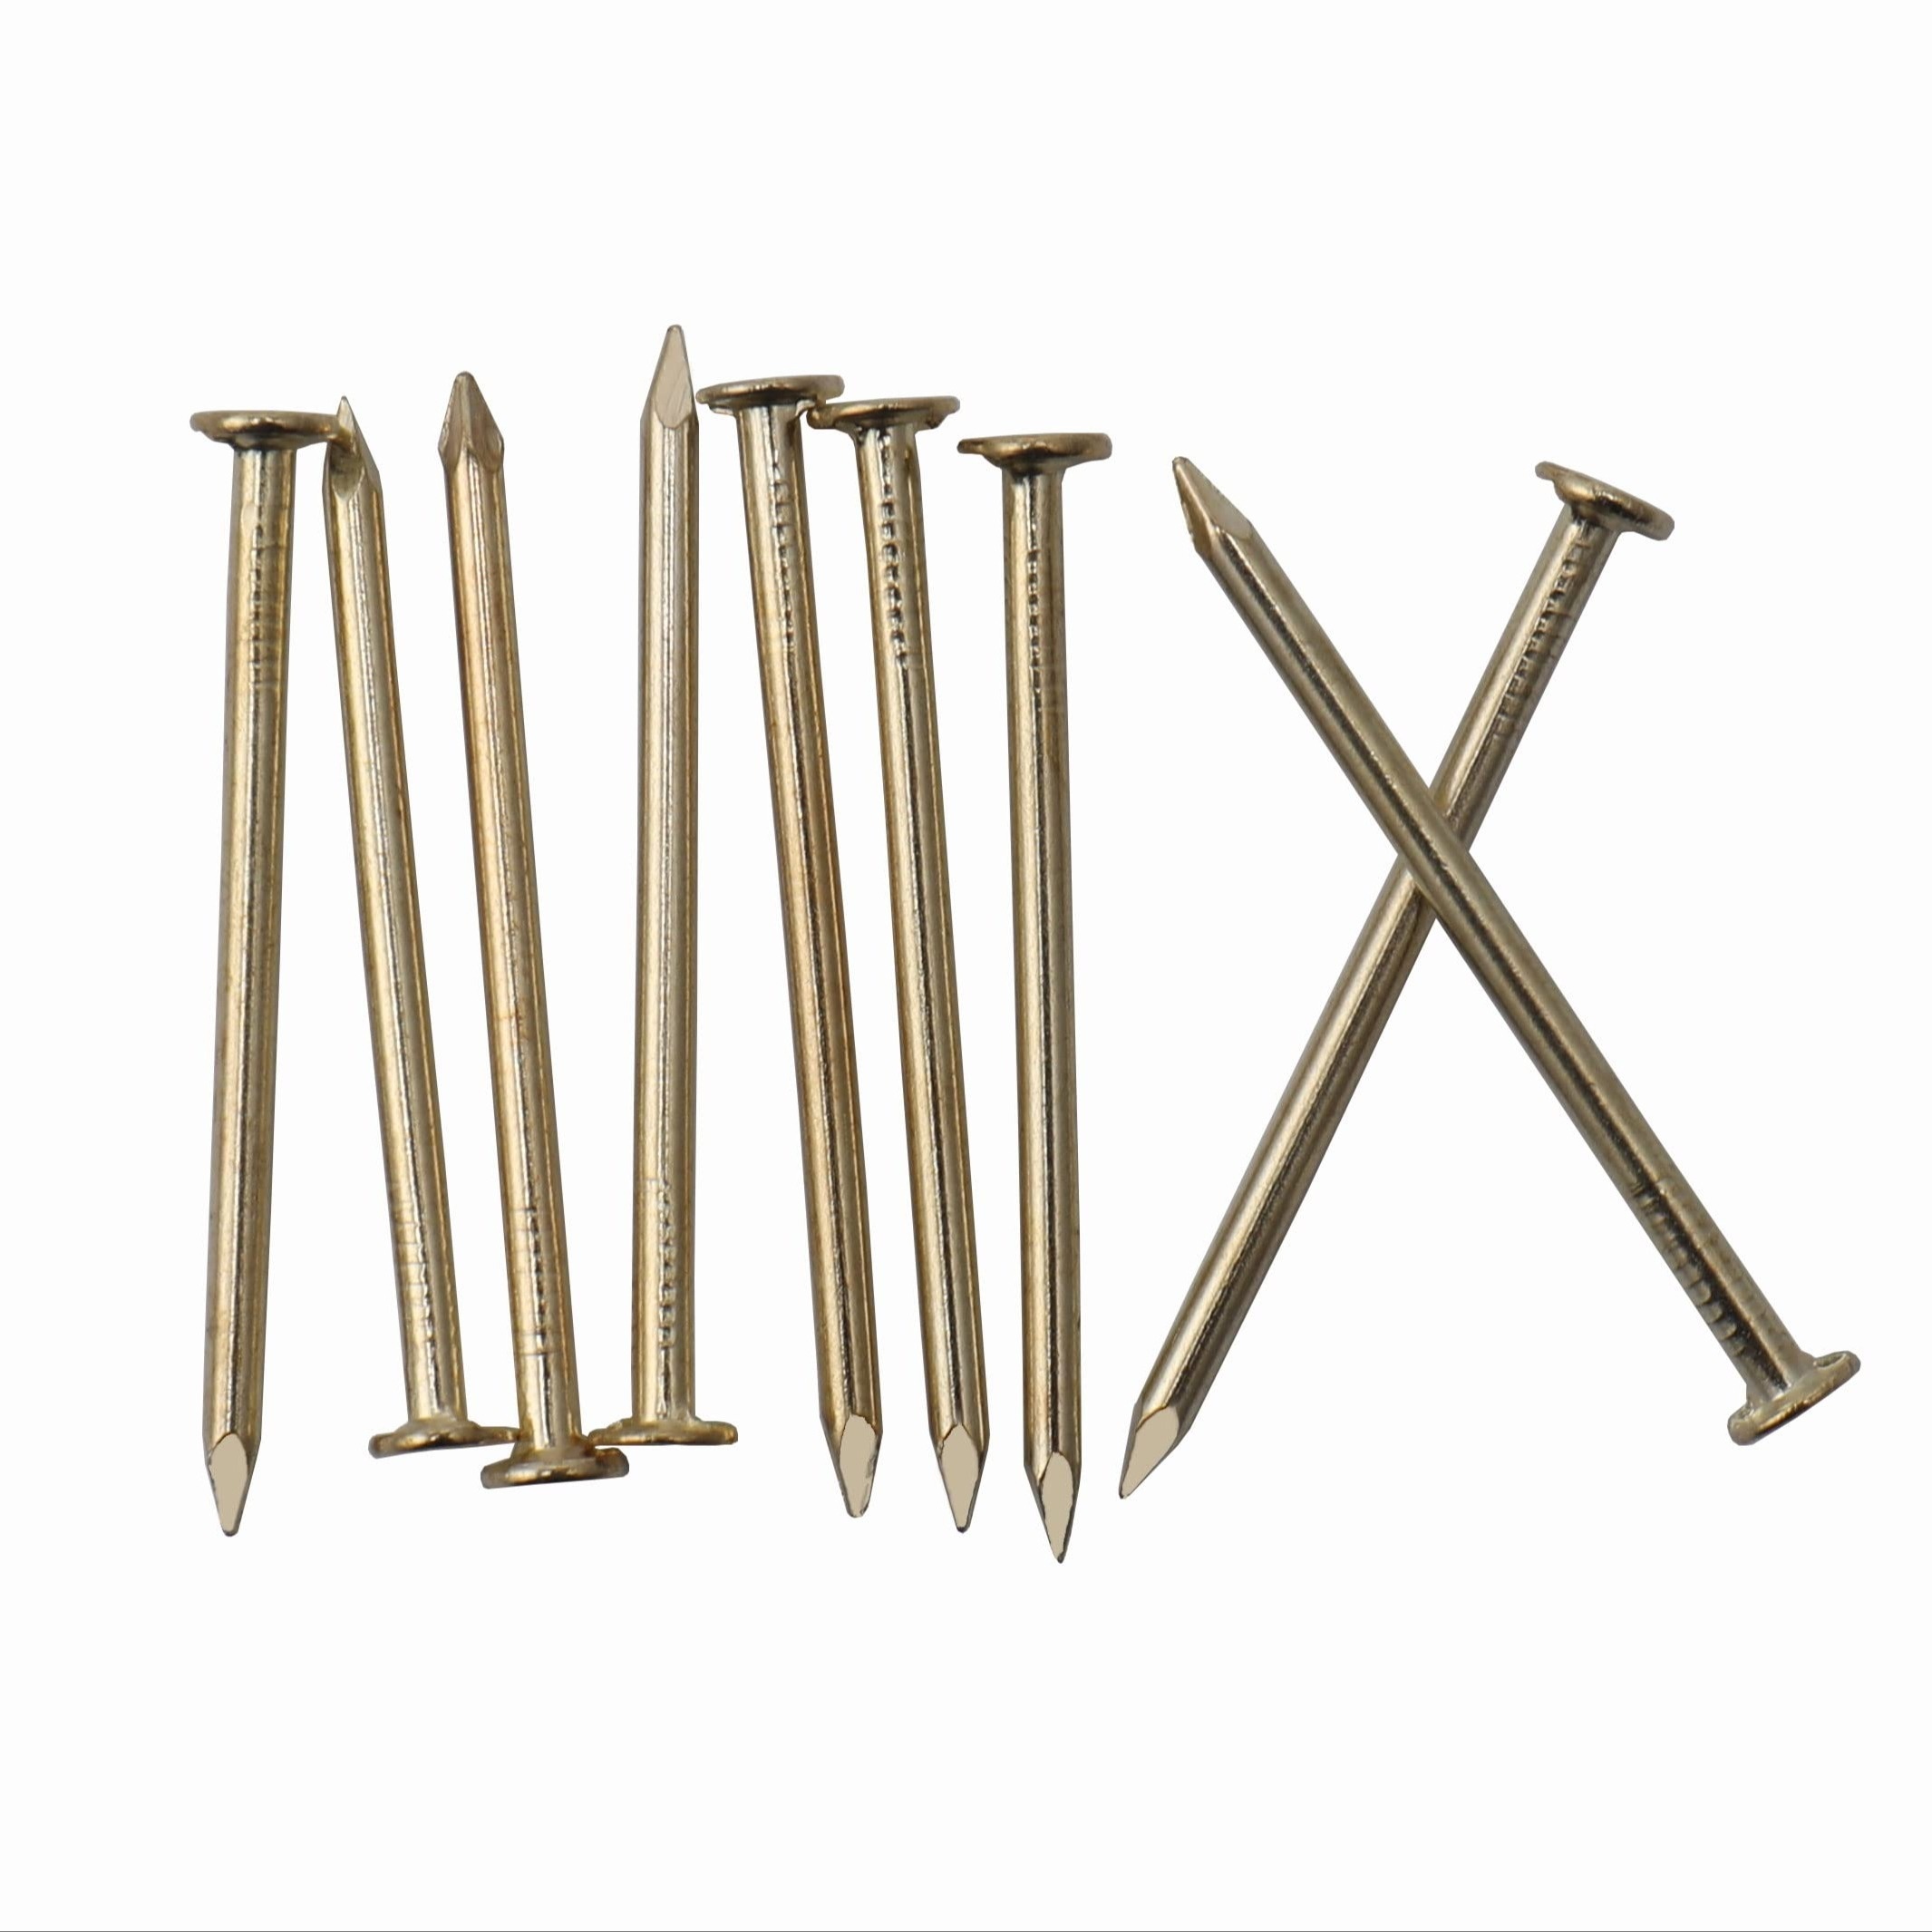 OOK Hillman OOK Brass-Plated Hardwall Picture Hanging Nails 10 lb 10 PK |  Boulevard Hardware & Supply Co